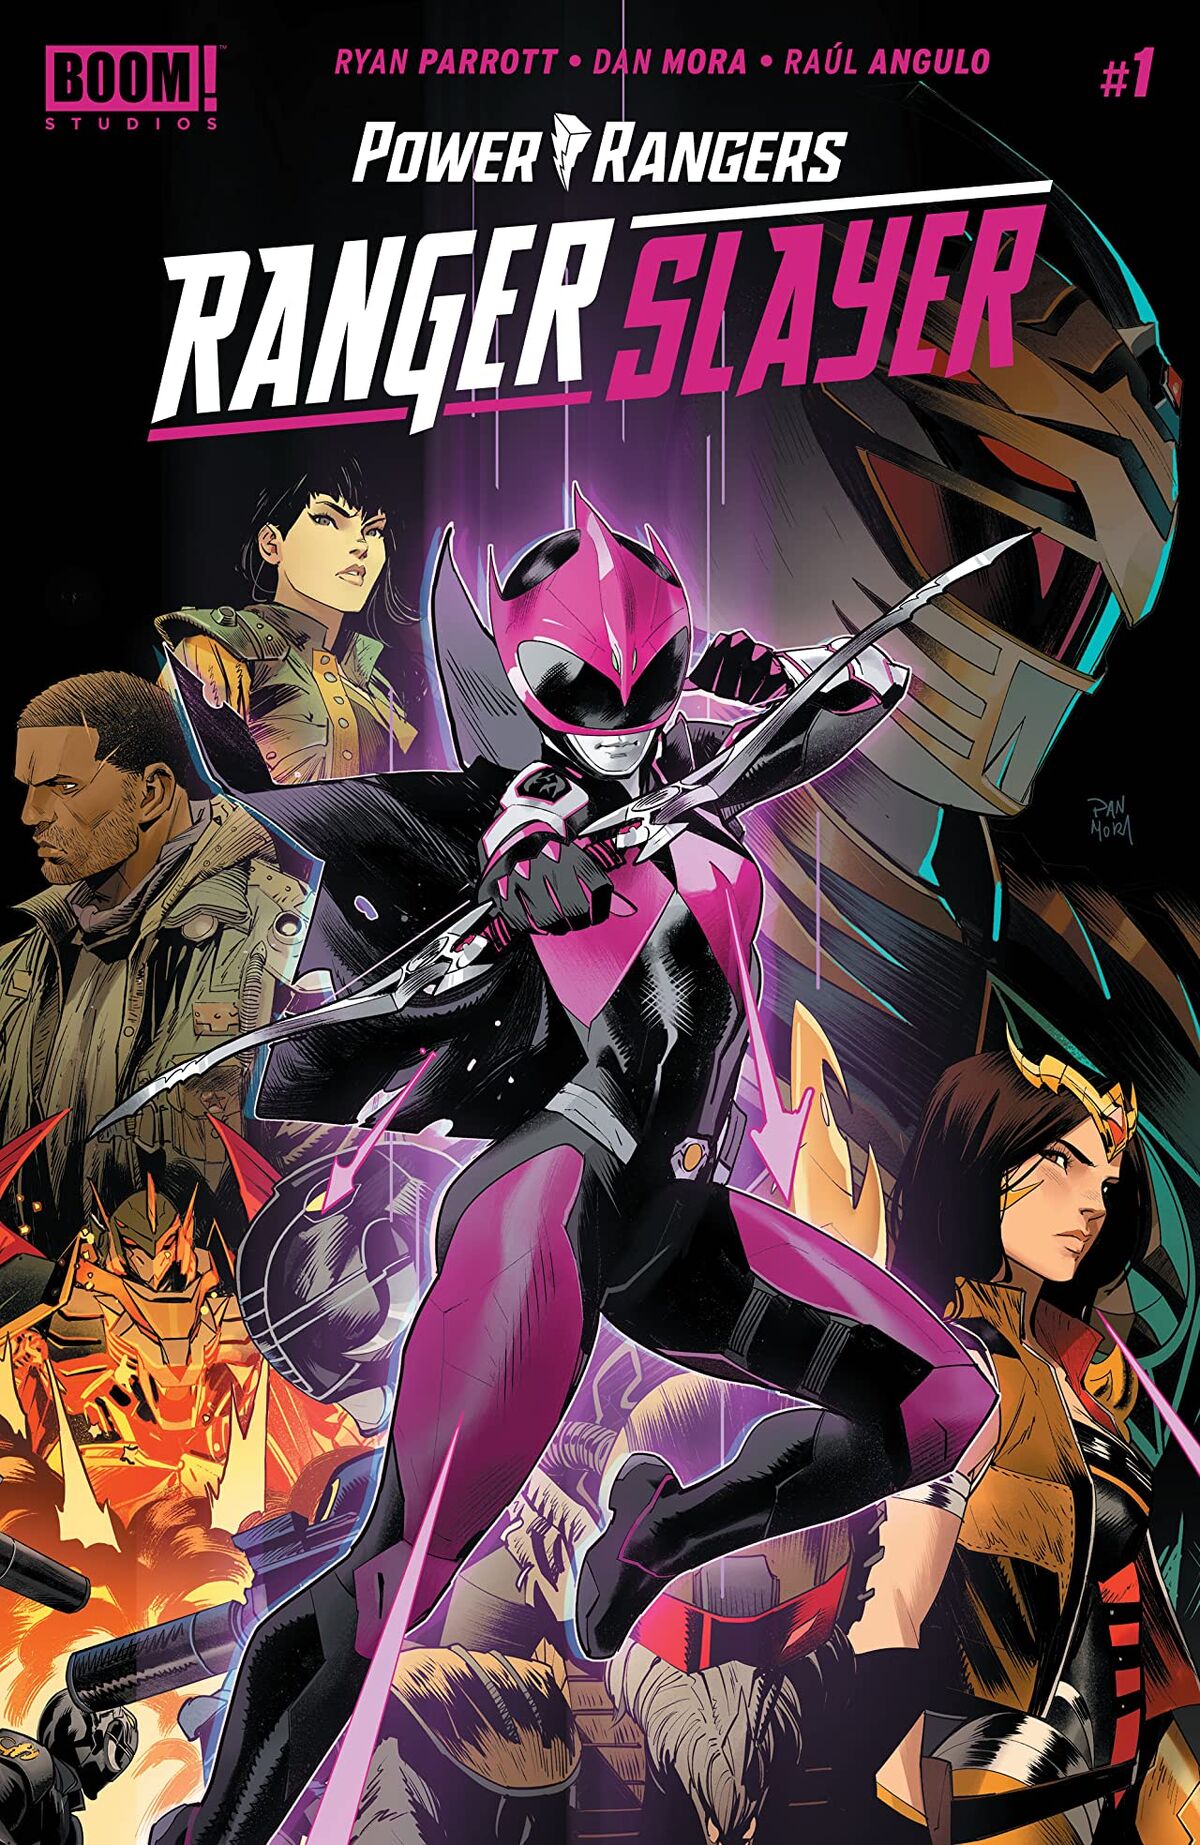 https://static.wikia.nocookie.net/powerrangers/images/f/f2/Power_Rangers_Ranger_Slayer_Issue_1.jpg/revision/latest/scale-to-width-down/1200?cb=20200720143250